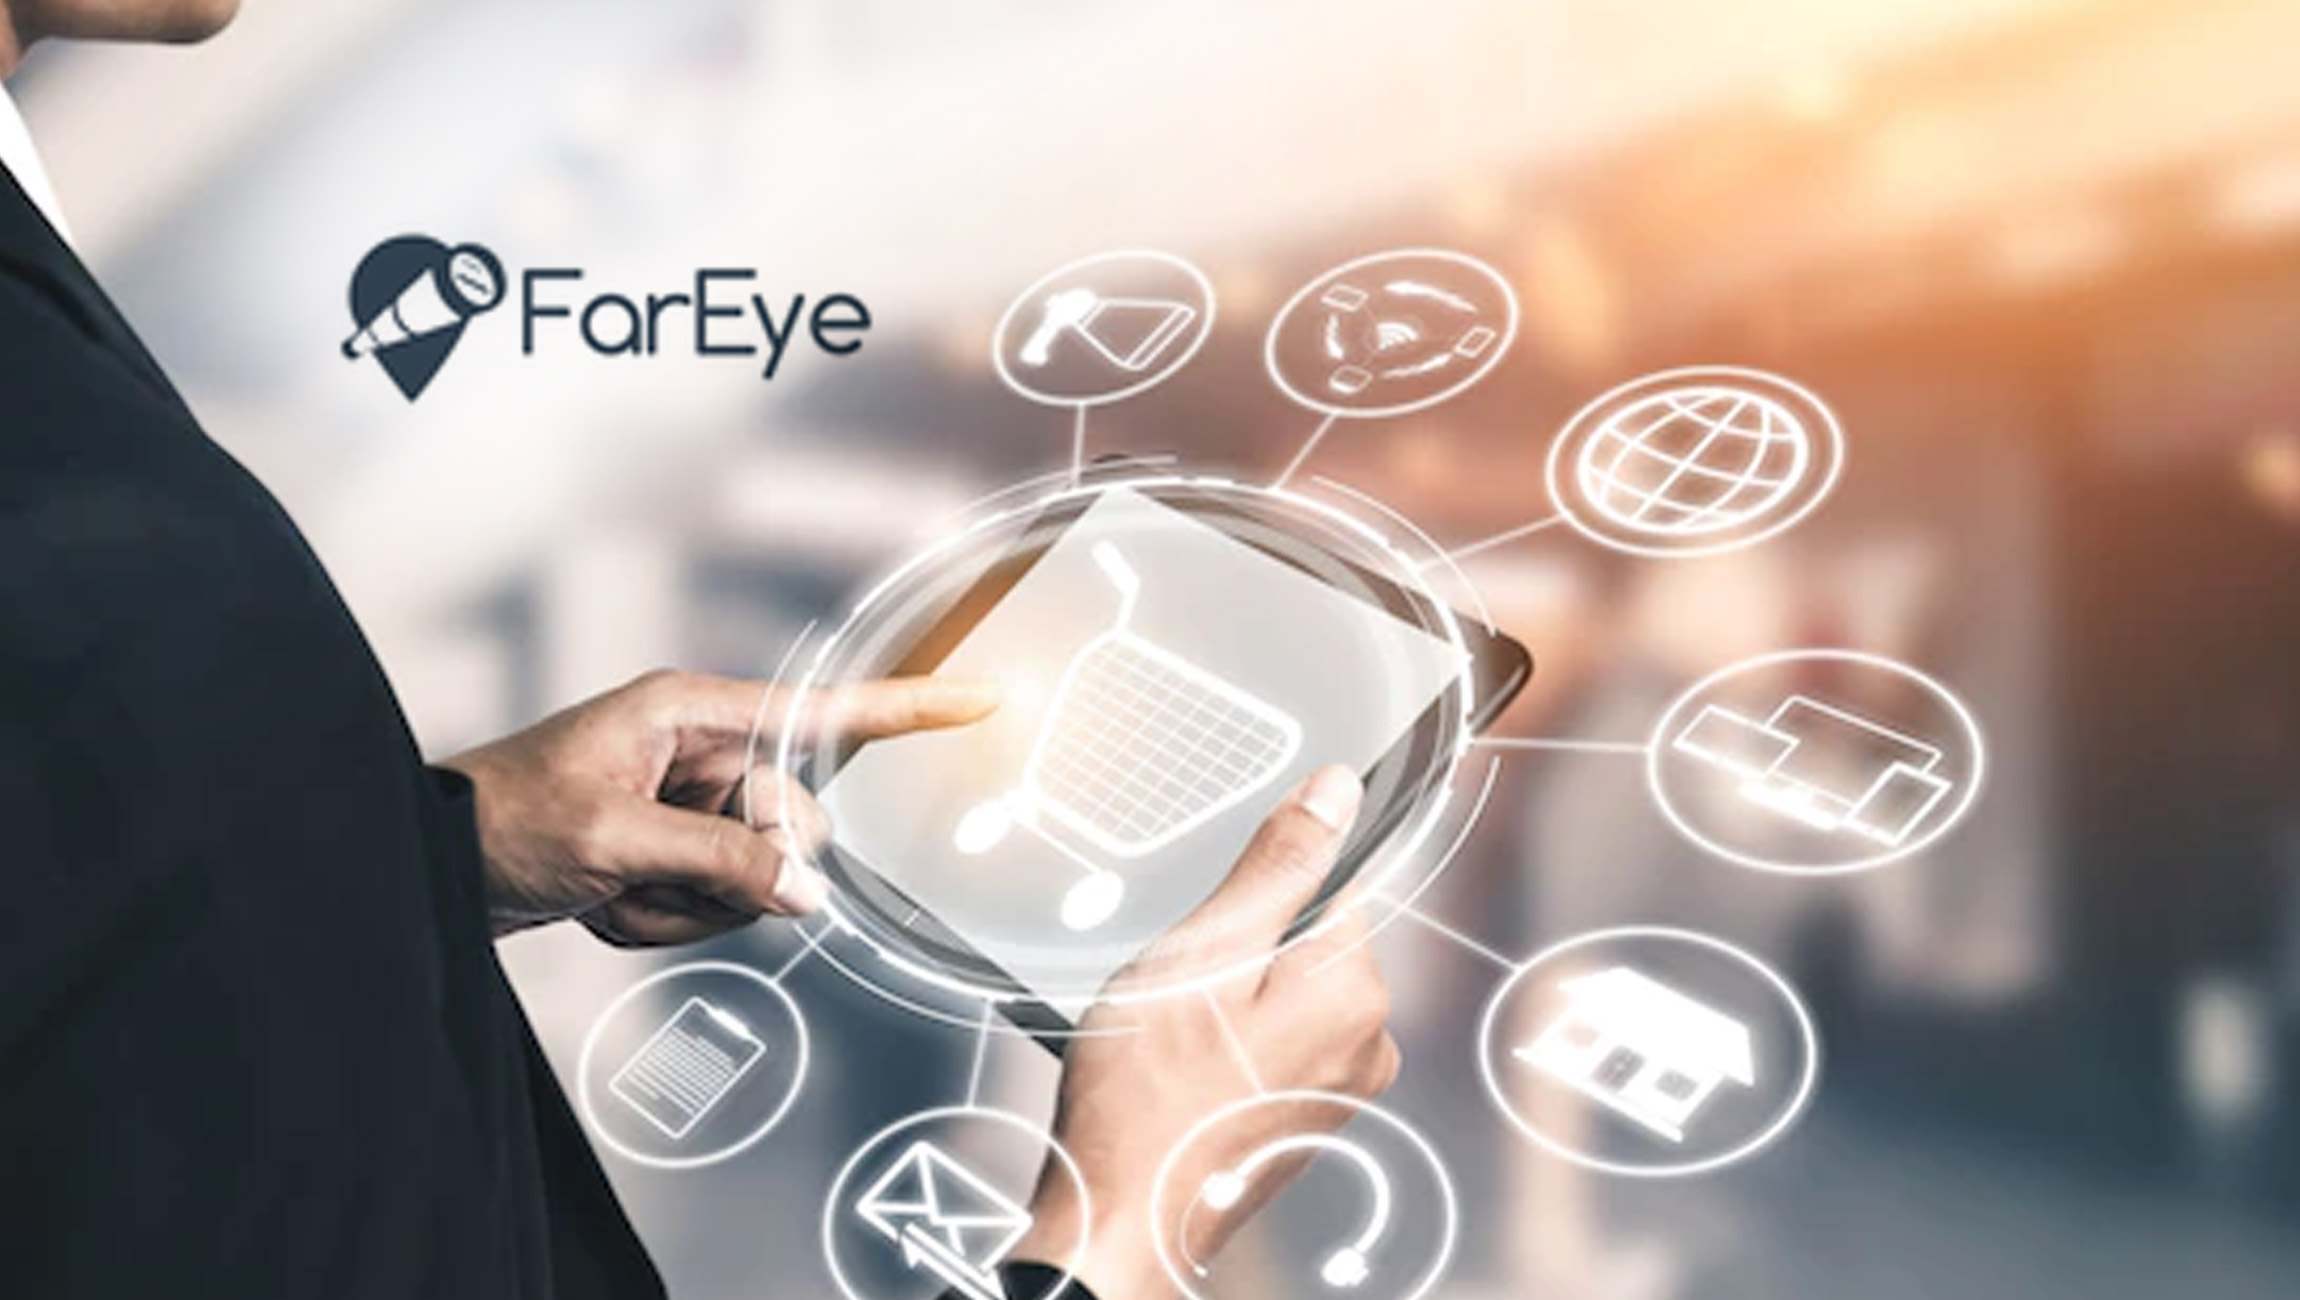 FarEye Launches Online Returns Management to Help Retailers Deliver a Seamless Consumer Experience